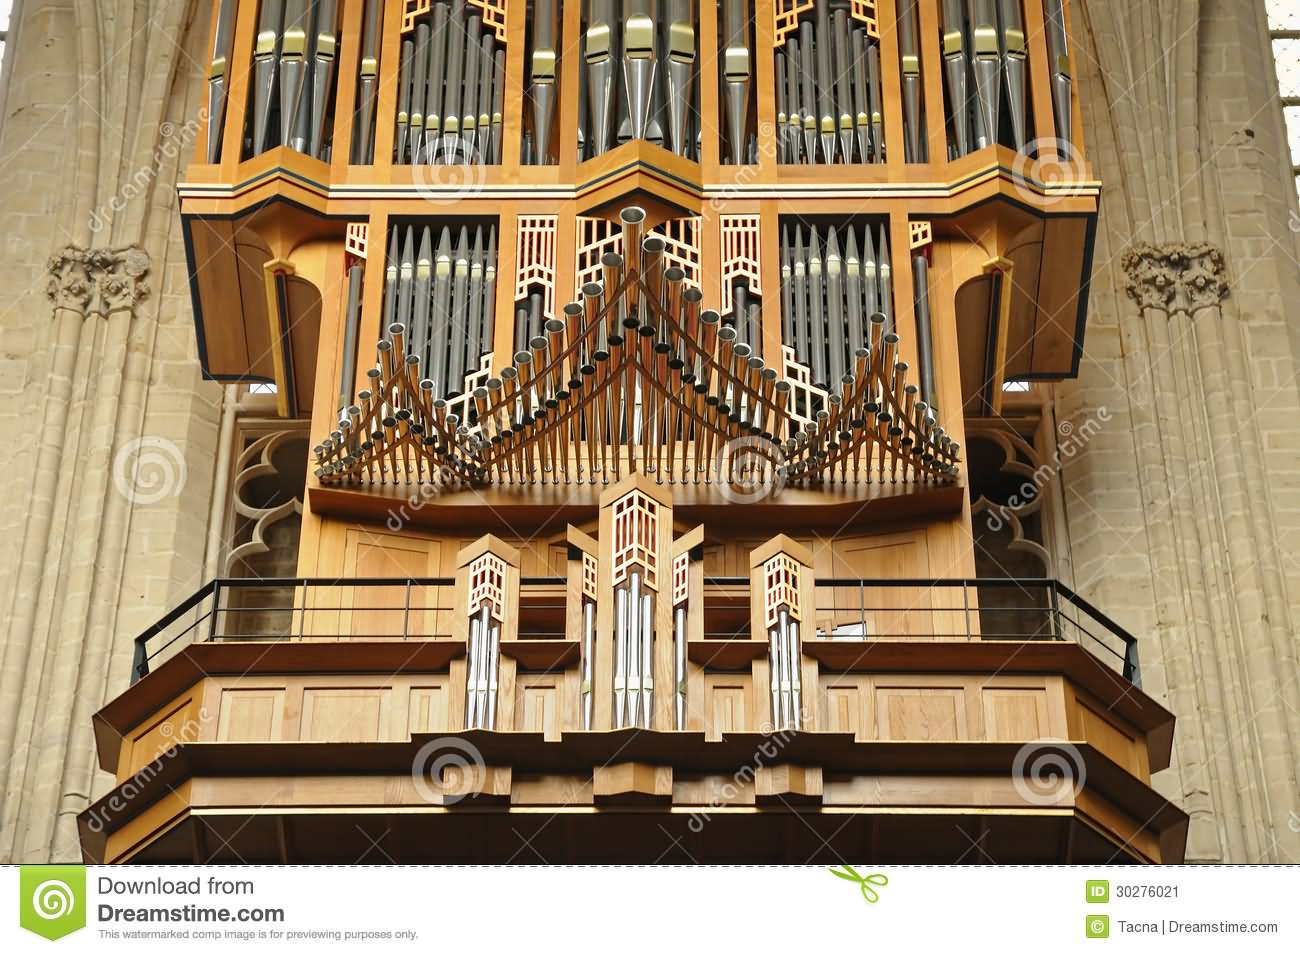 Pipe Organ Inside The Cathedral of St. Michael and St. Gudula In Brussels, Belgium